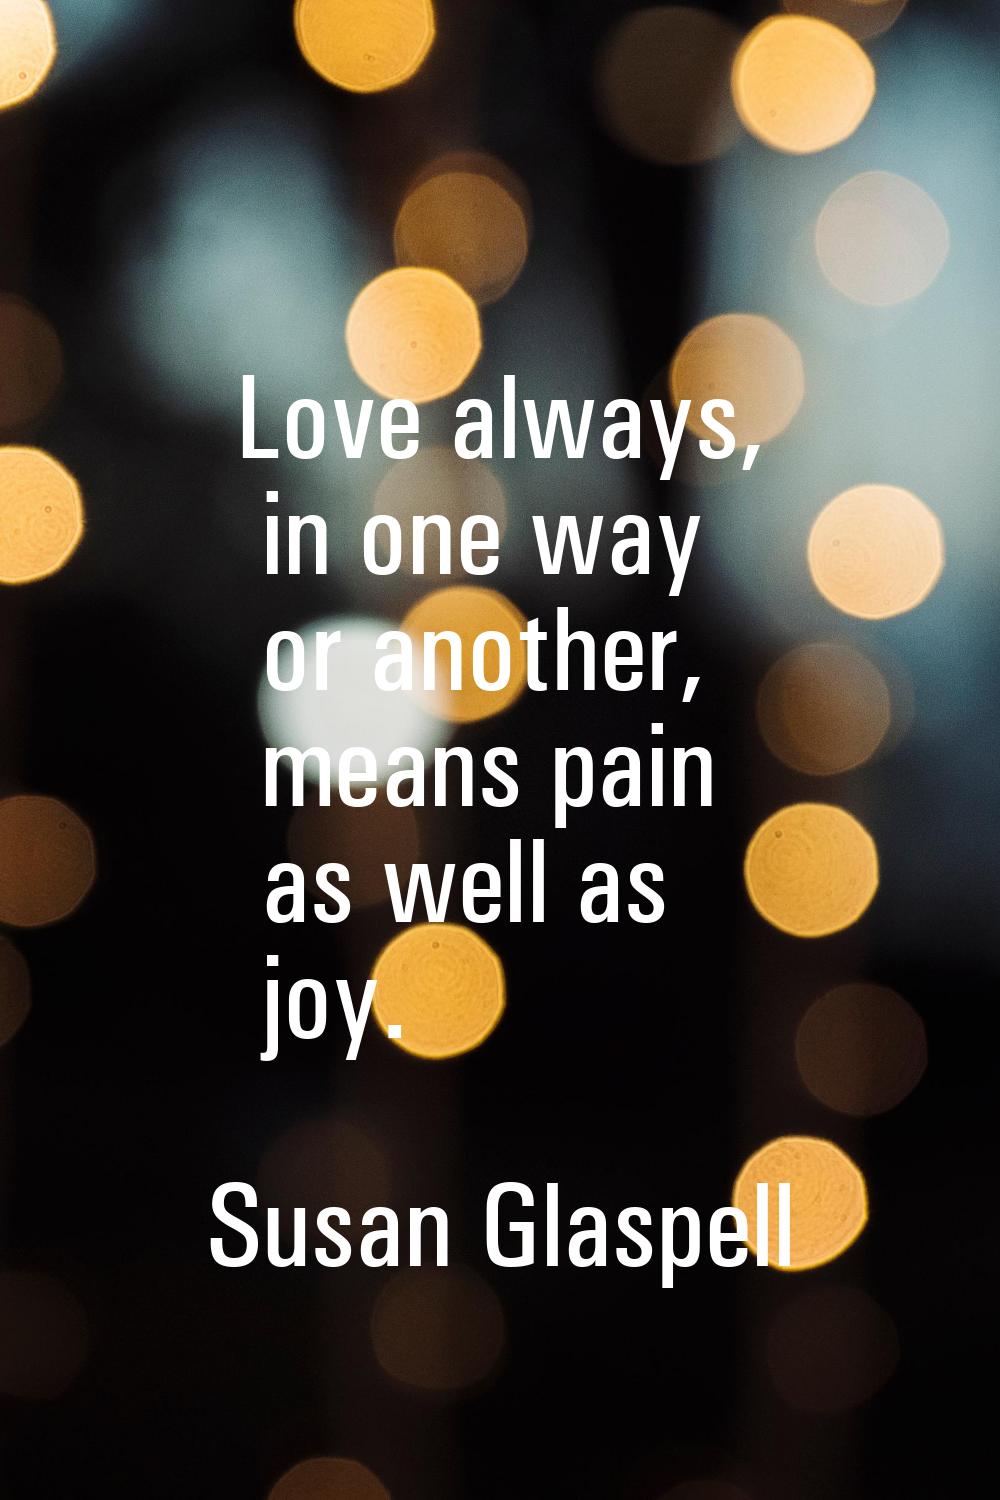 Love always, in one way or another, means pain as well as joy.